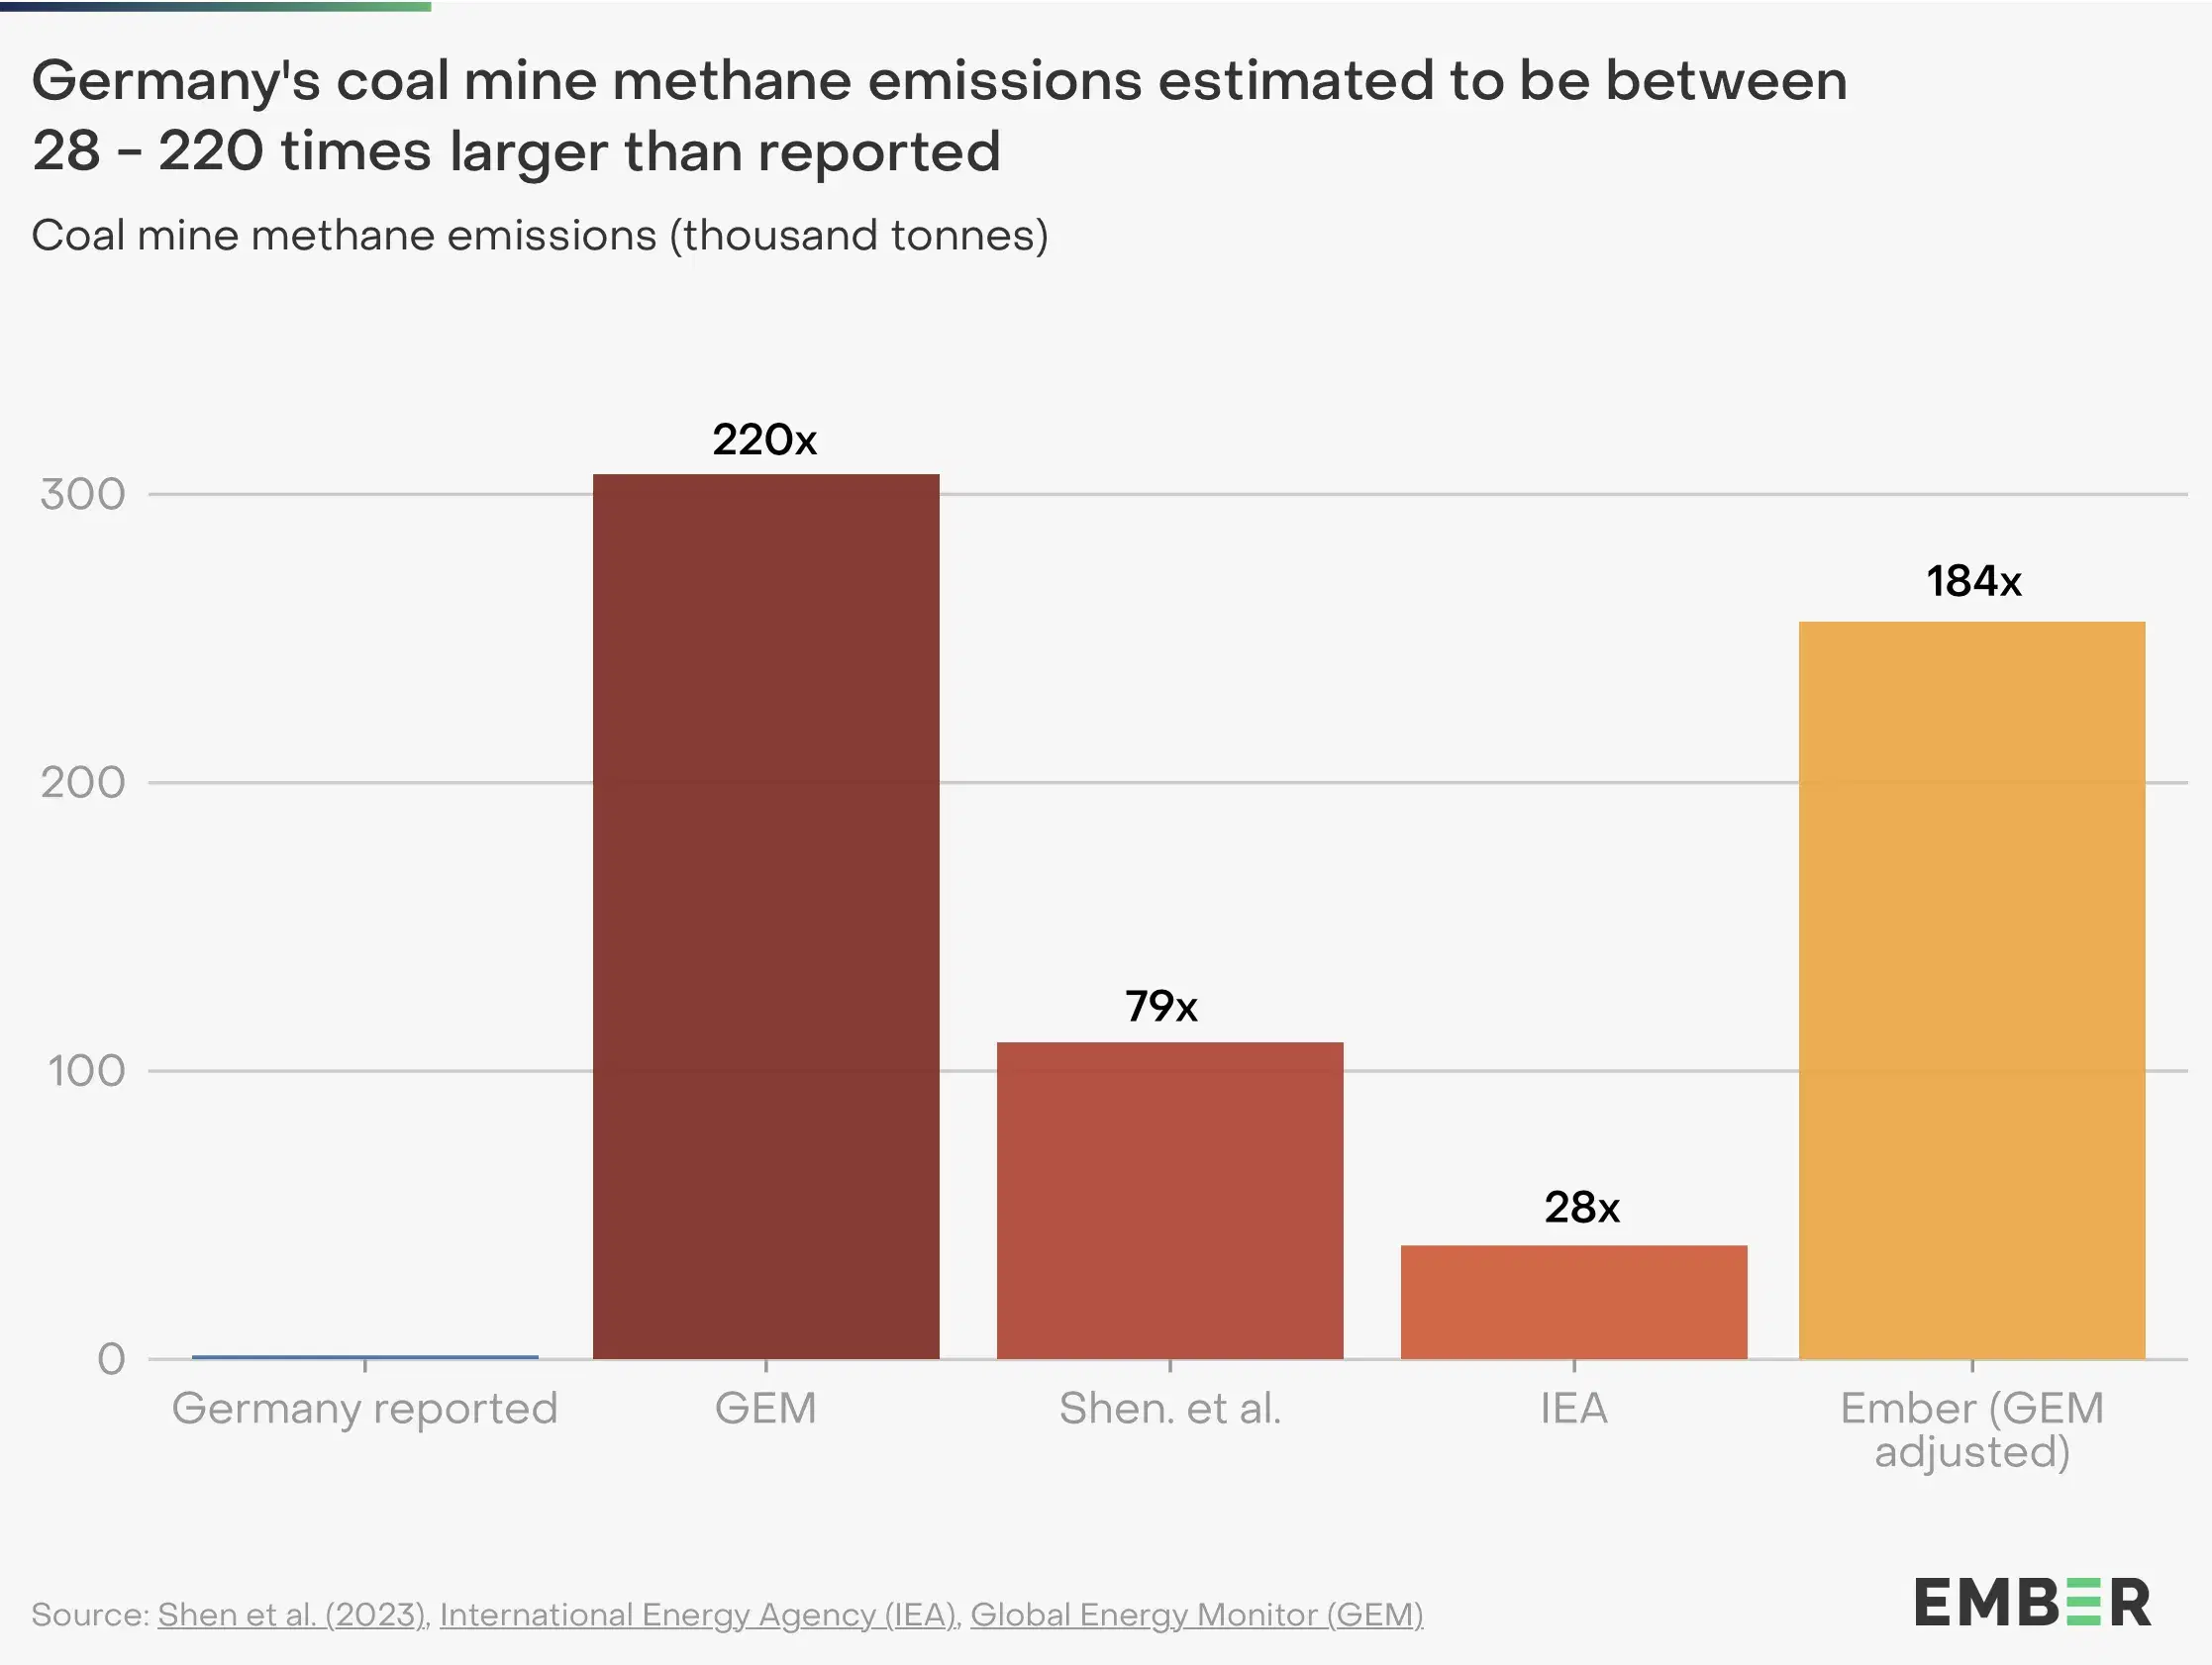 Germany's Methane Emissions Appear to Be Much Higher Than Official Reports